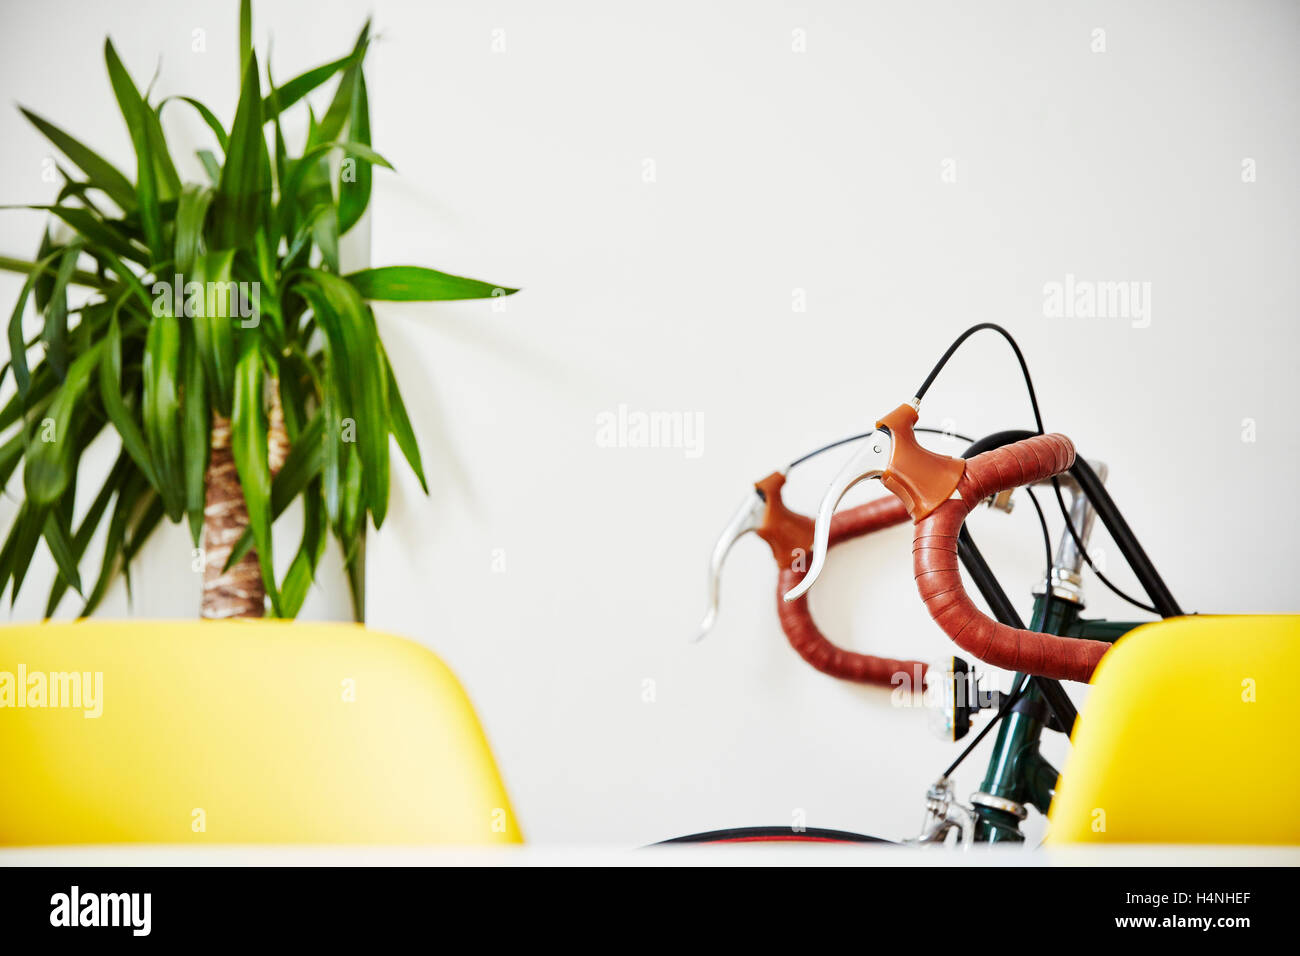 A bicycle with red curved handle bars leaning against a white wall, beside a plant. Stock Photo